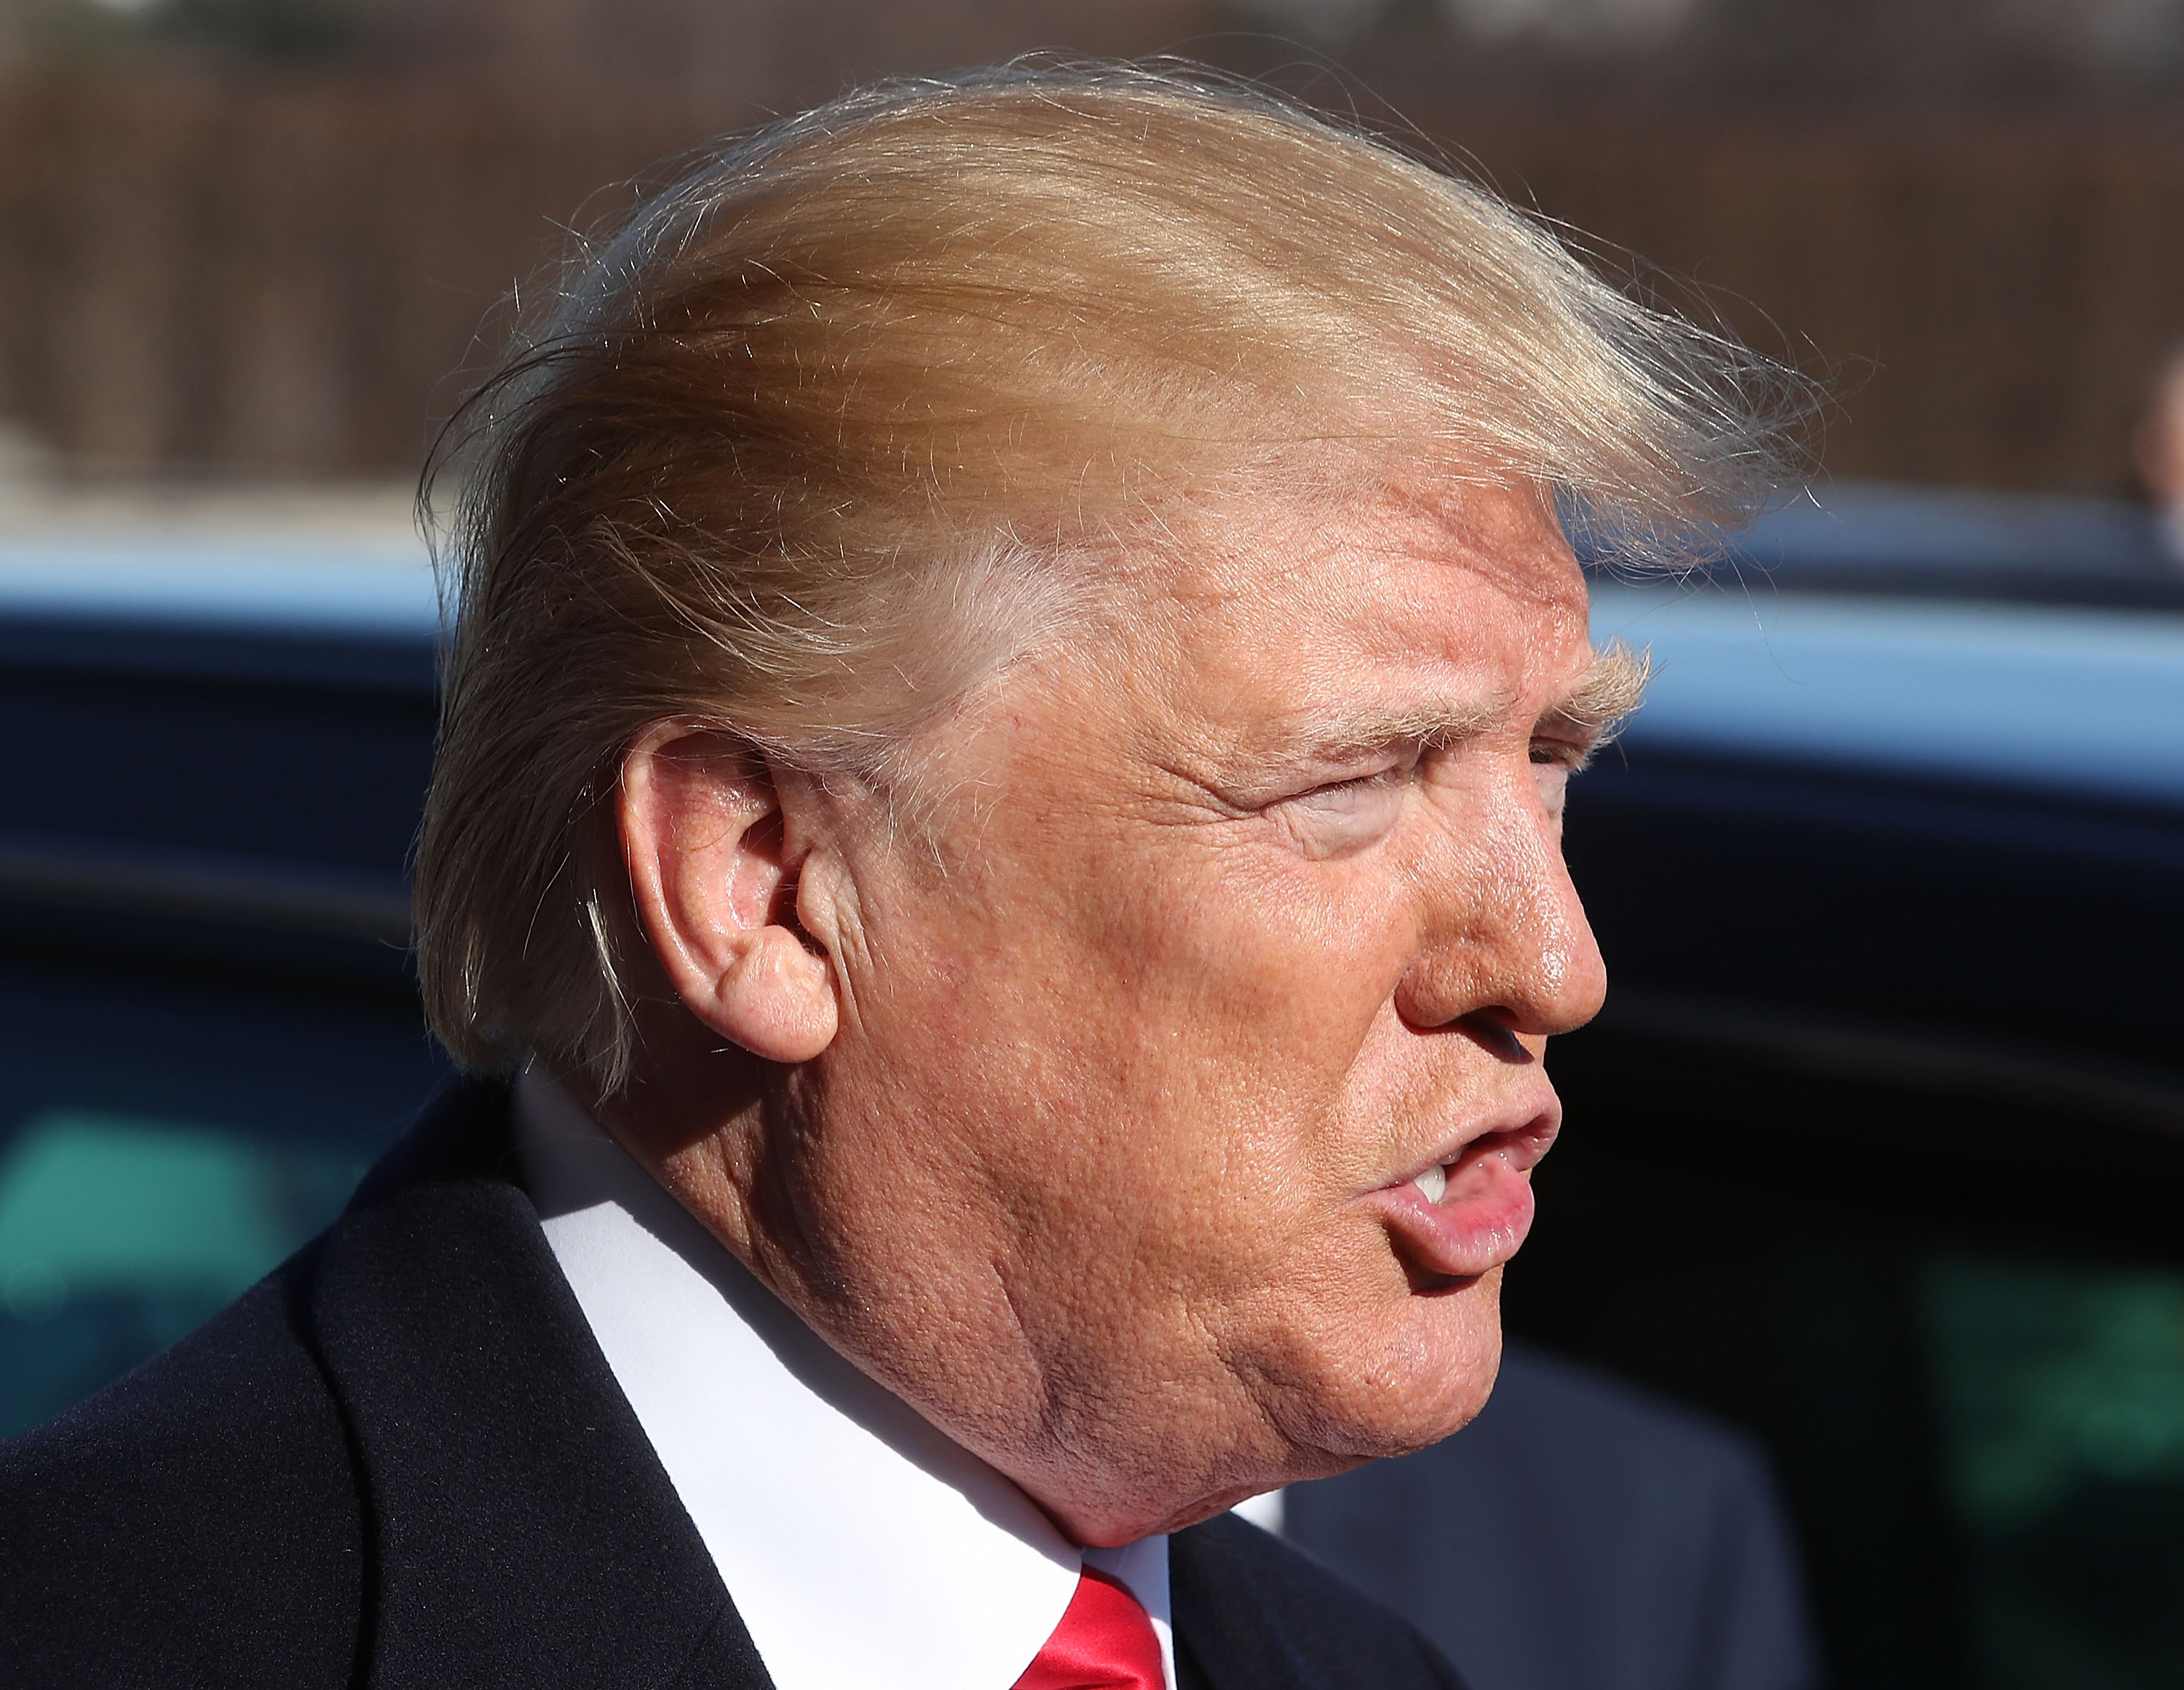 ARLINGTON, VA - JANUARY 18: U.S. President Donald Trump speaks to the media after arriving for a meeting at the Pentagon, on January 18, 2018 in Arlington, Virginia. (Photo by Mark Wilson/Getty Images)